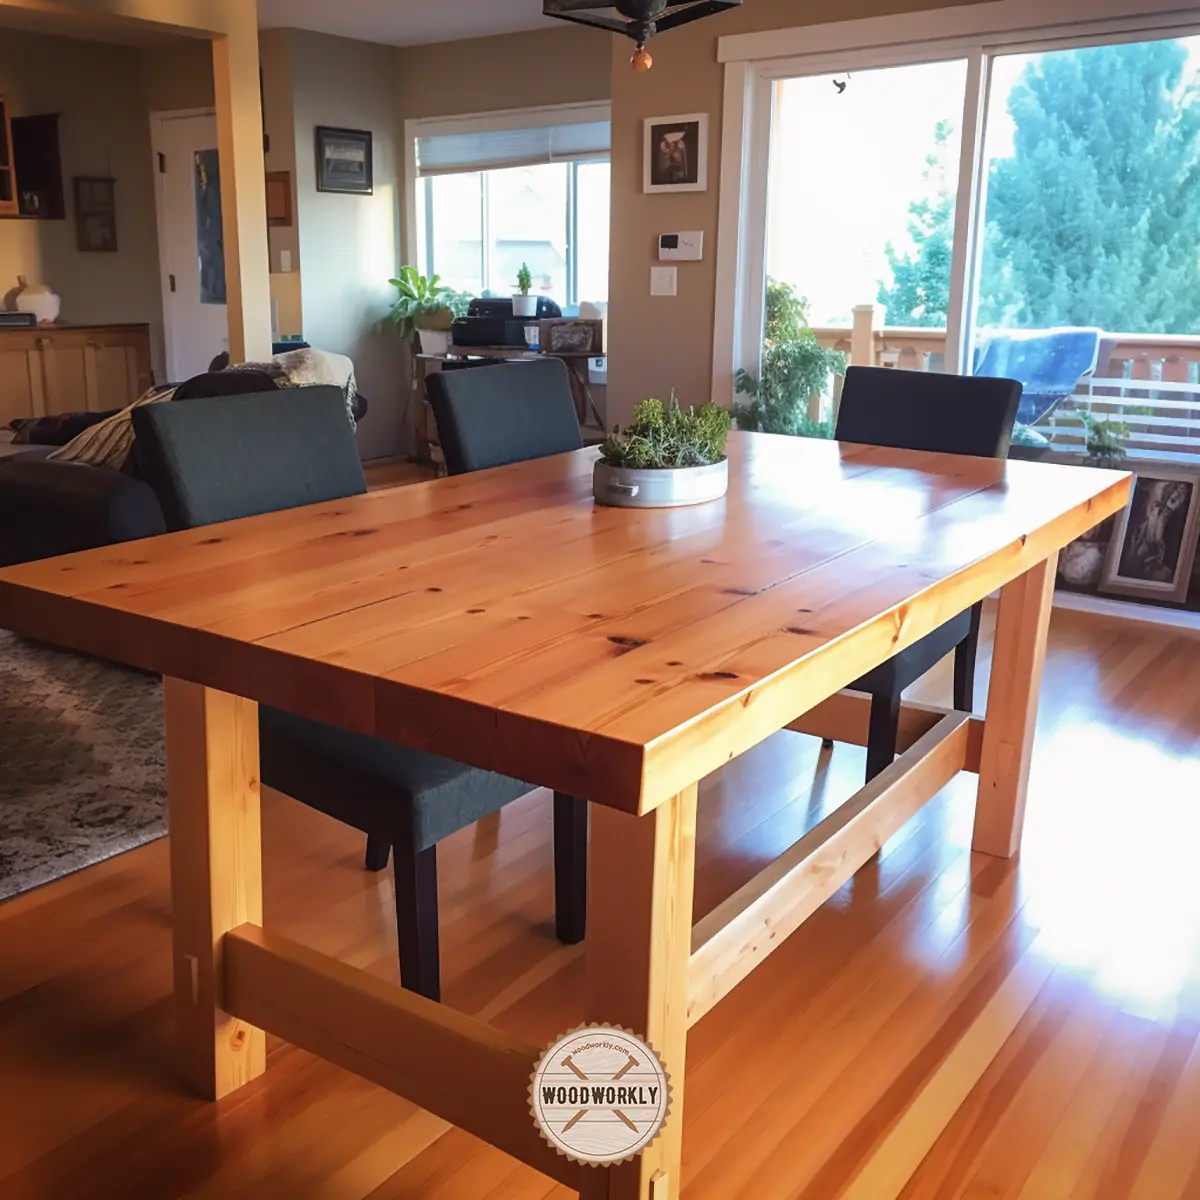 Stained Douglas fir dining table